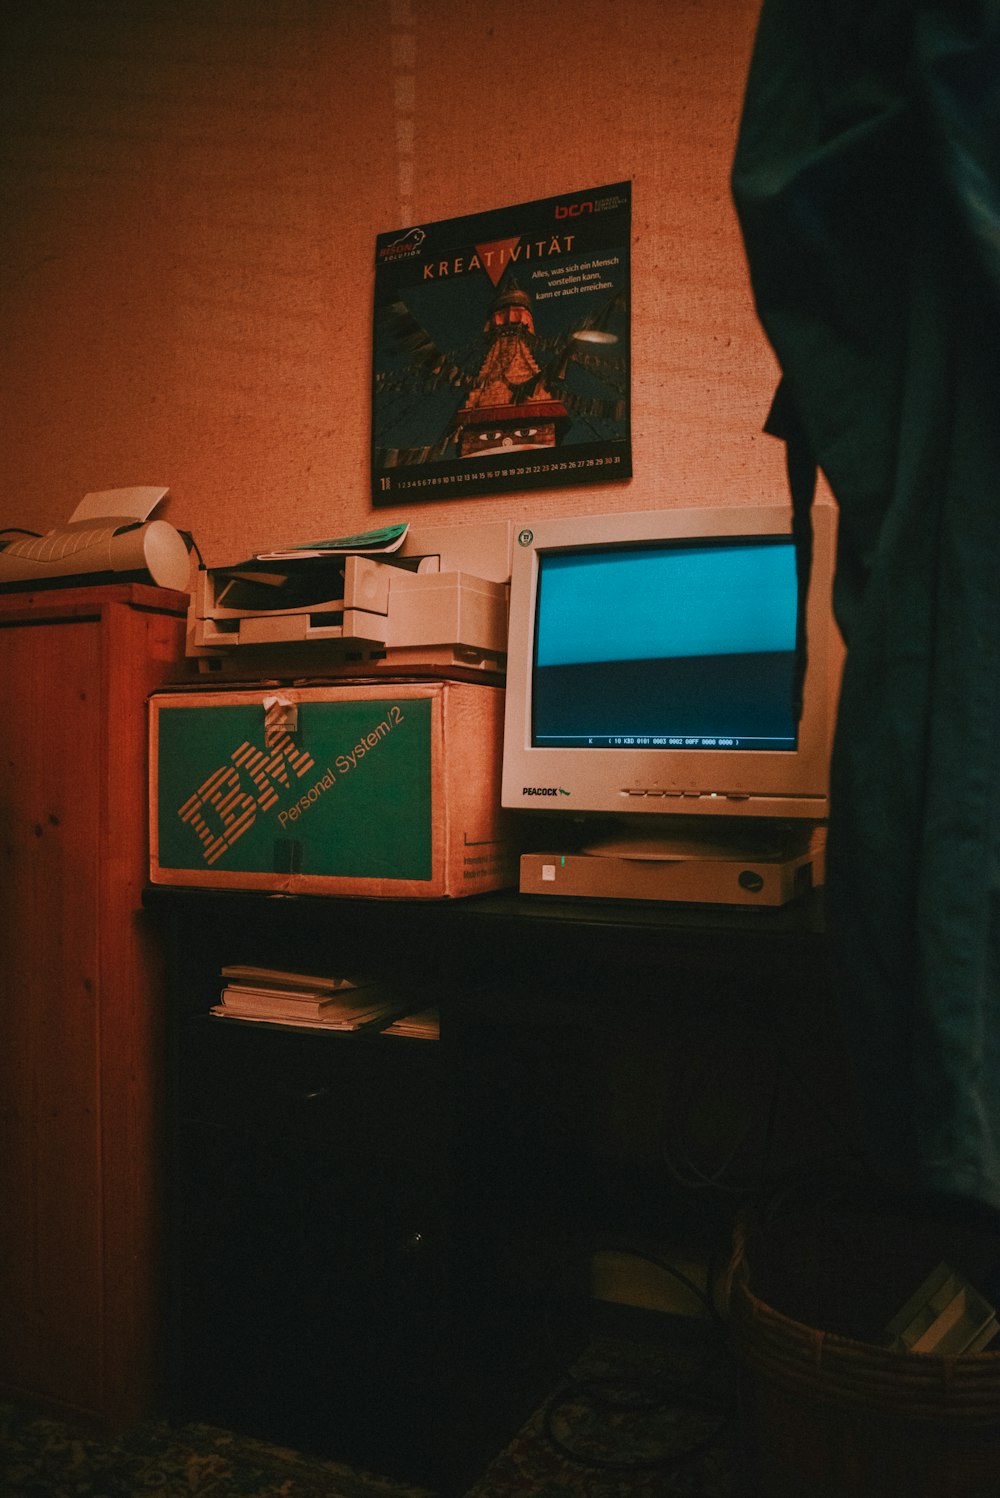 silver crt computer monitor on brown wooden desk